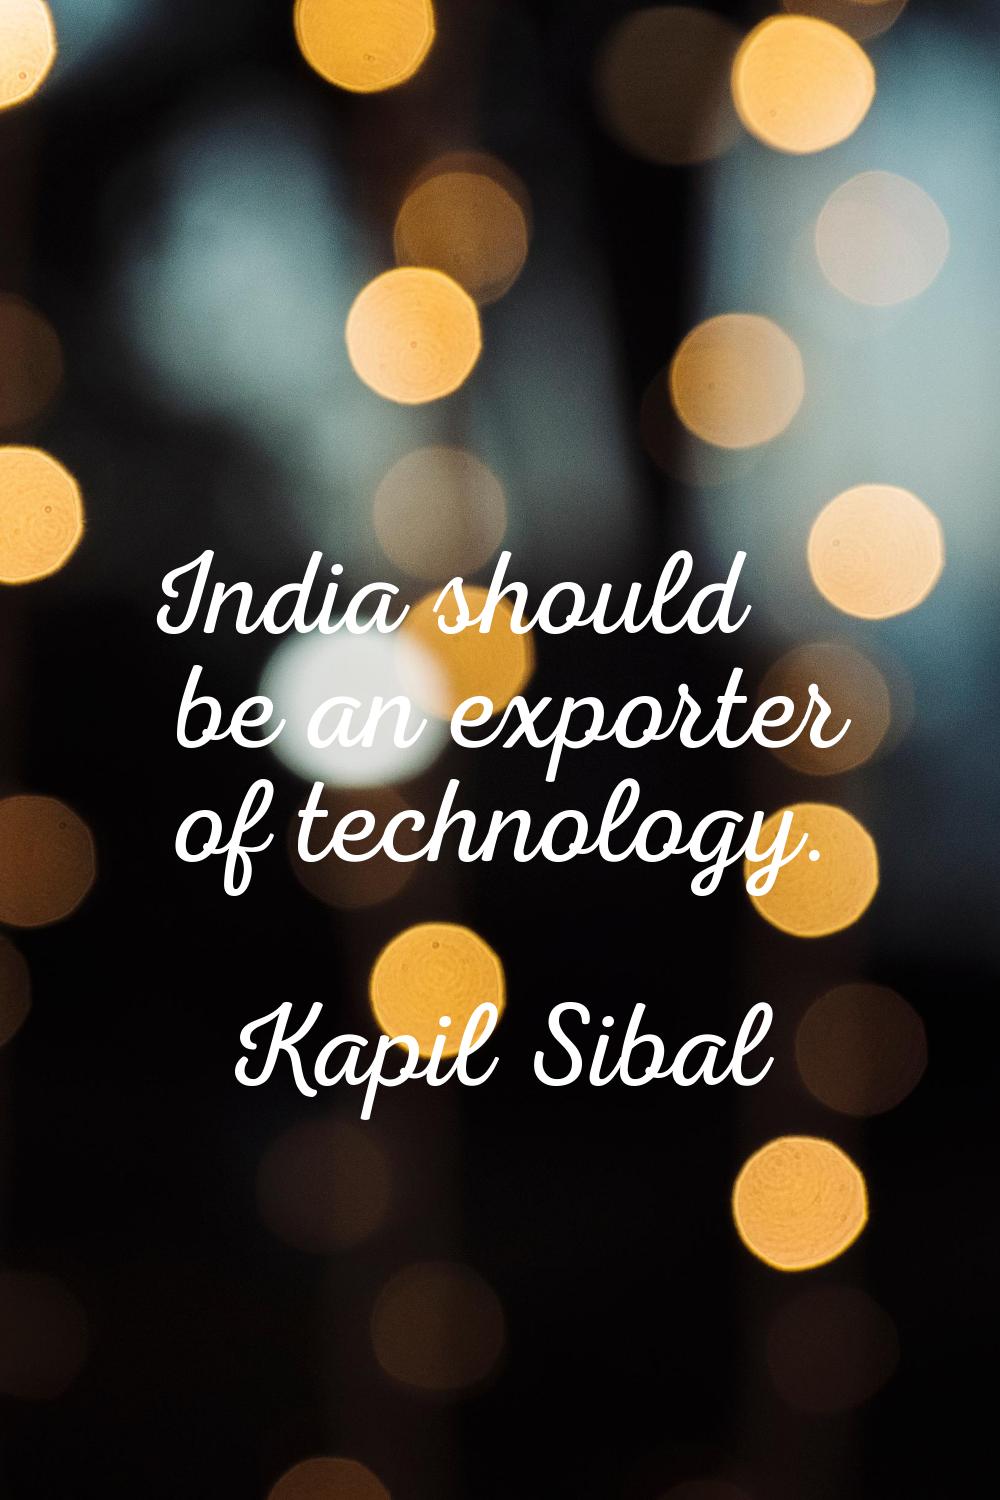 India should be an exporter of technology.